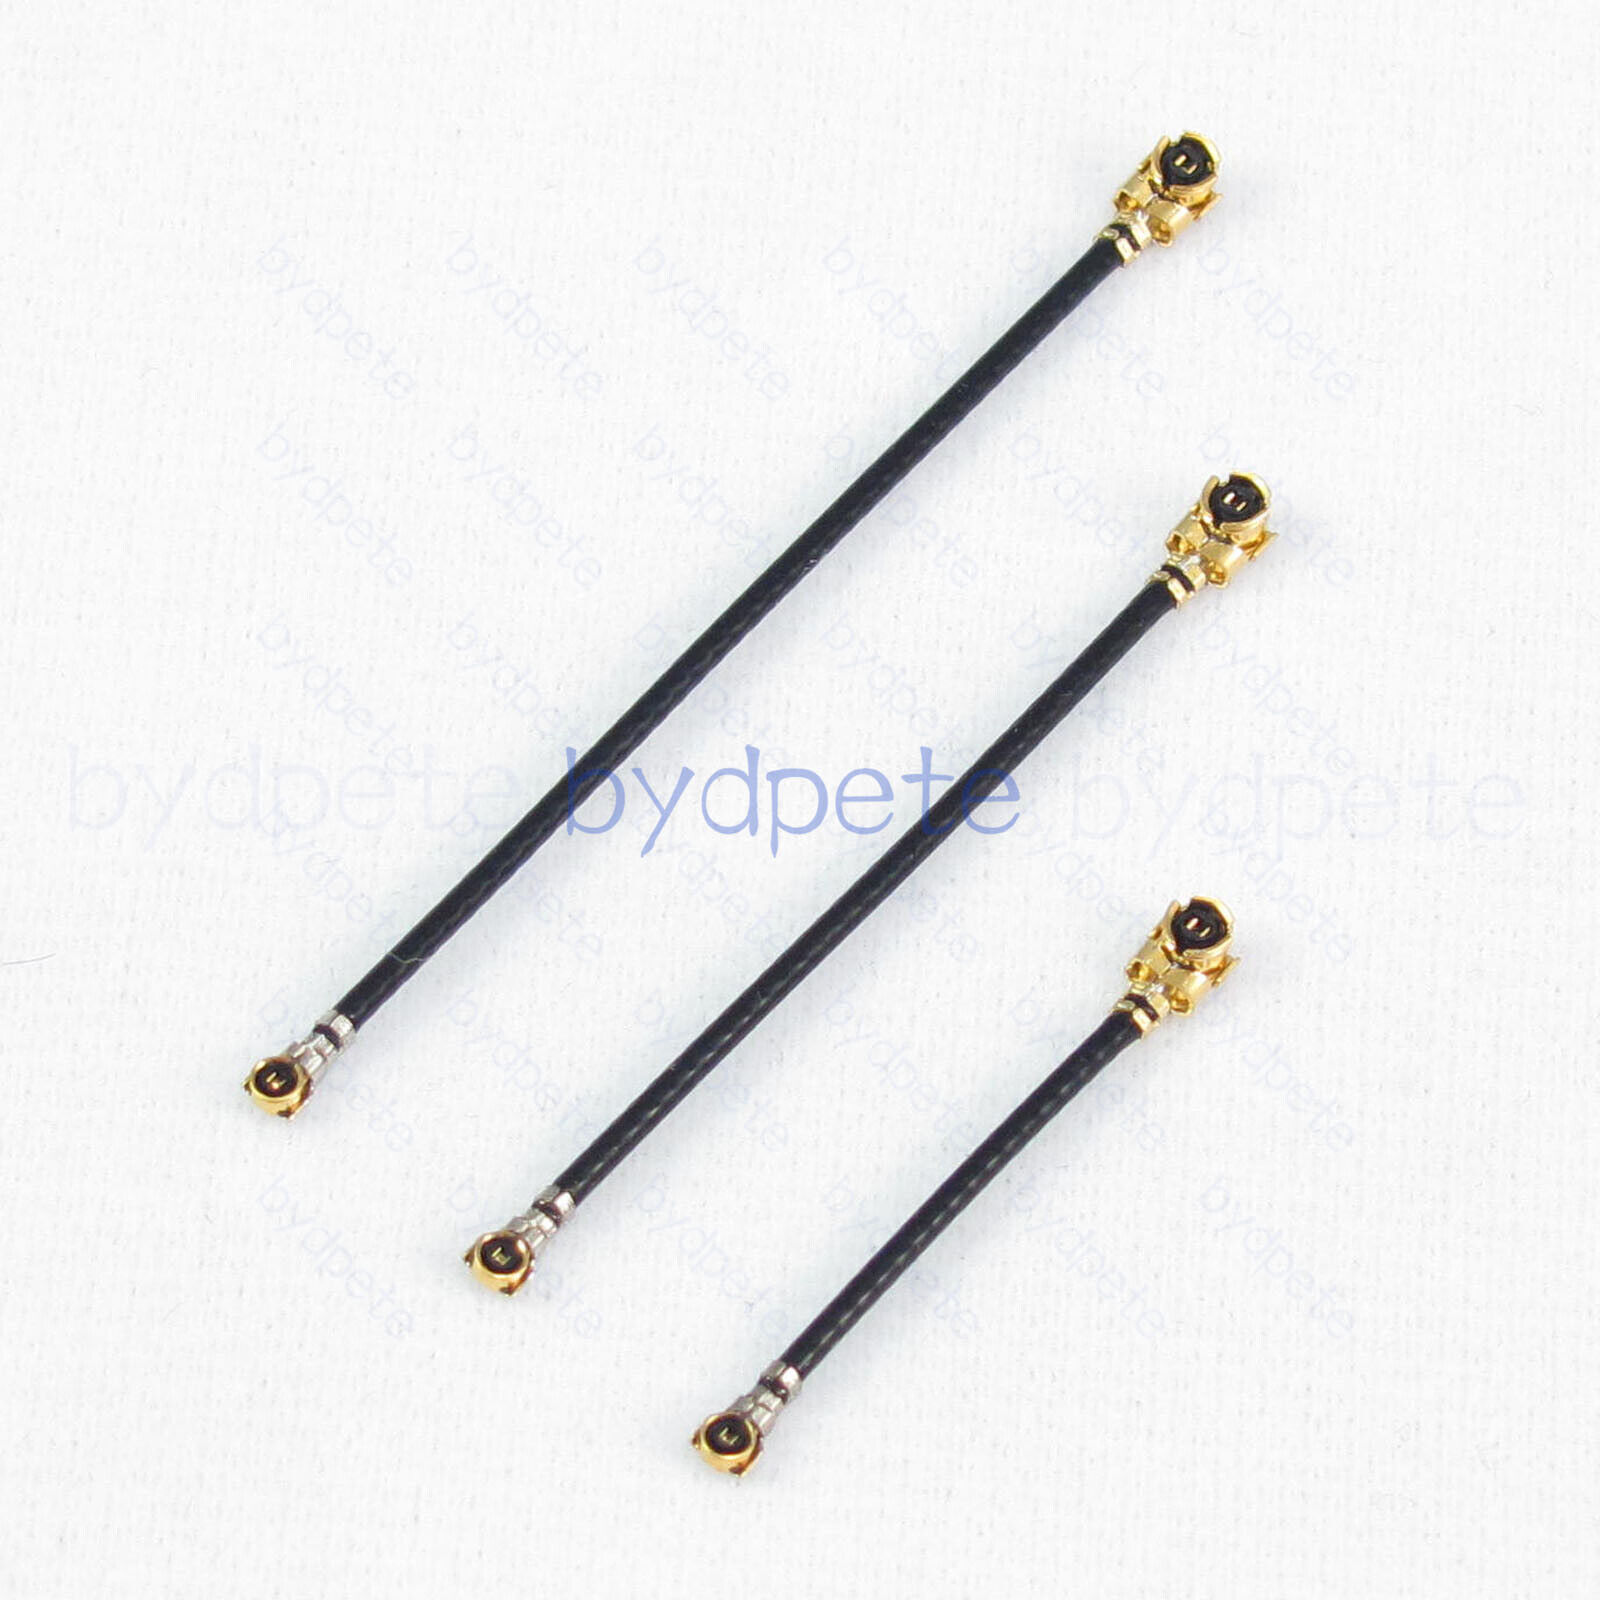 WFL W.FL W'FL MHF4 to UFL U.FL IPX IPEX MHF OD 1.13mm Coaxial cable Kable 50 ohm